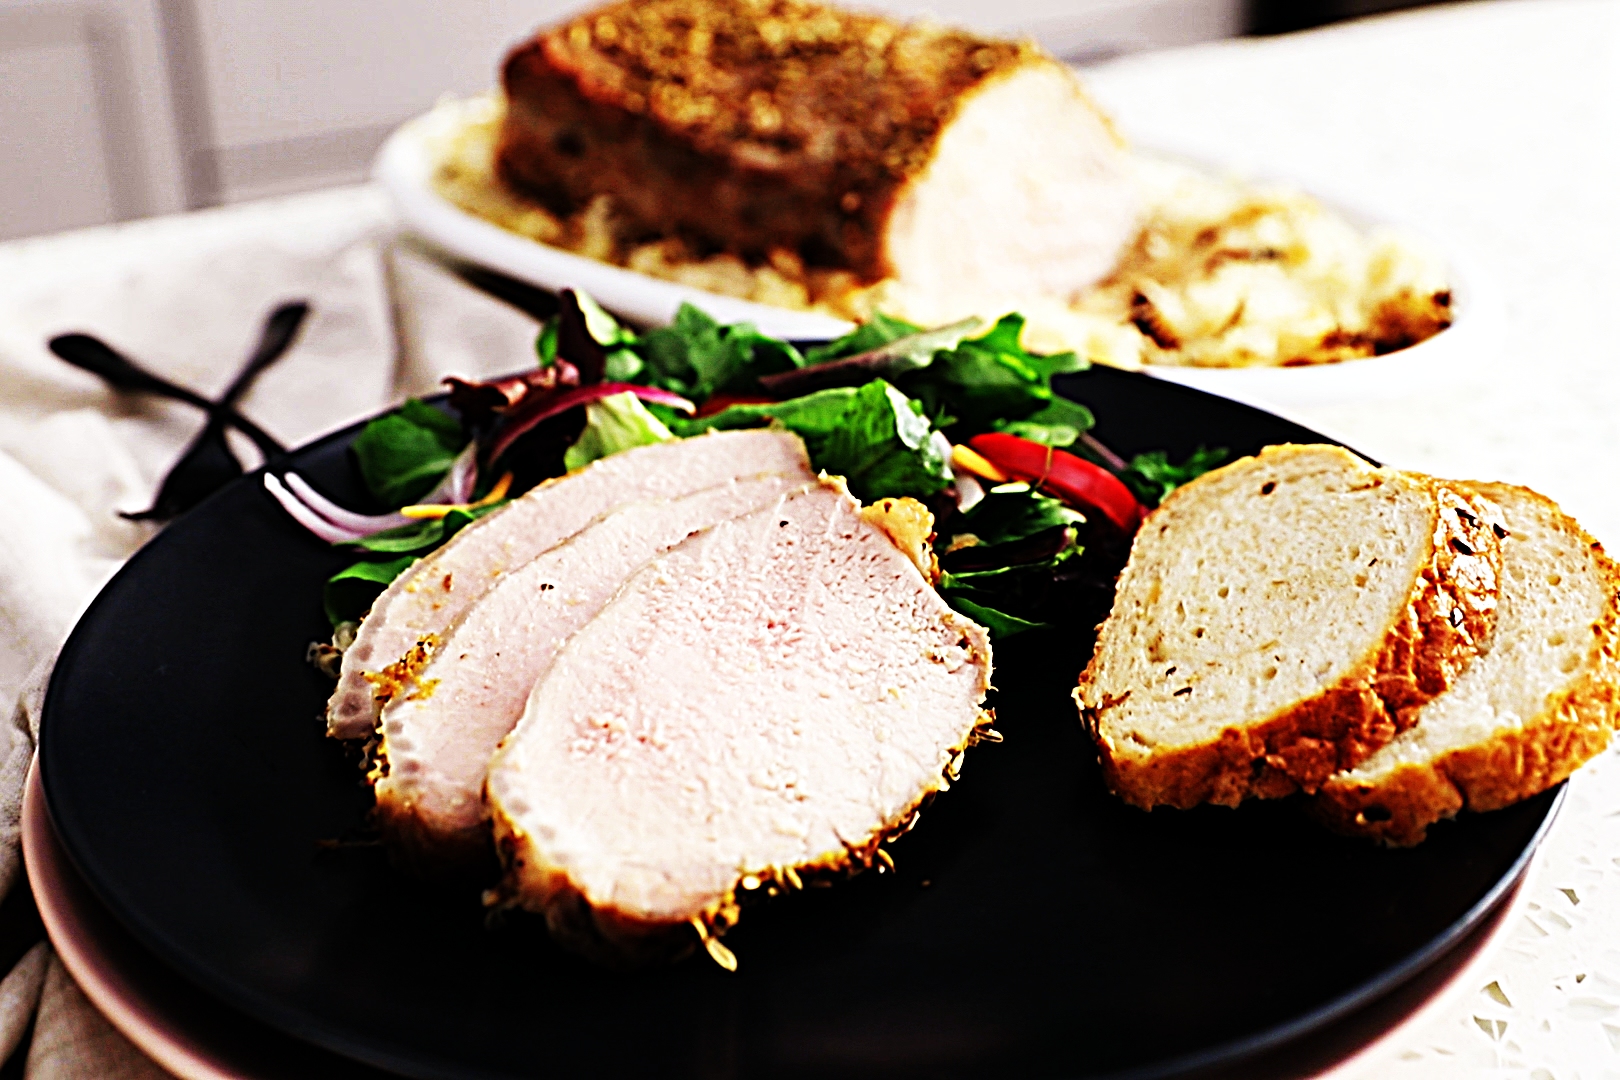 Stupid-Easy Recipe for Roasted Pork Loin with Sauerkraut (#1 Top-Rated)